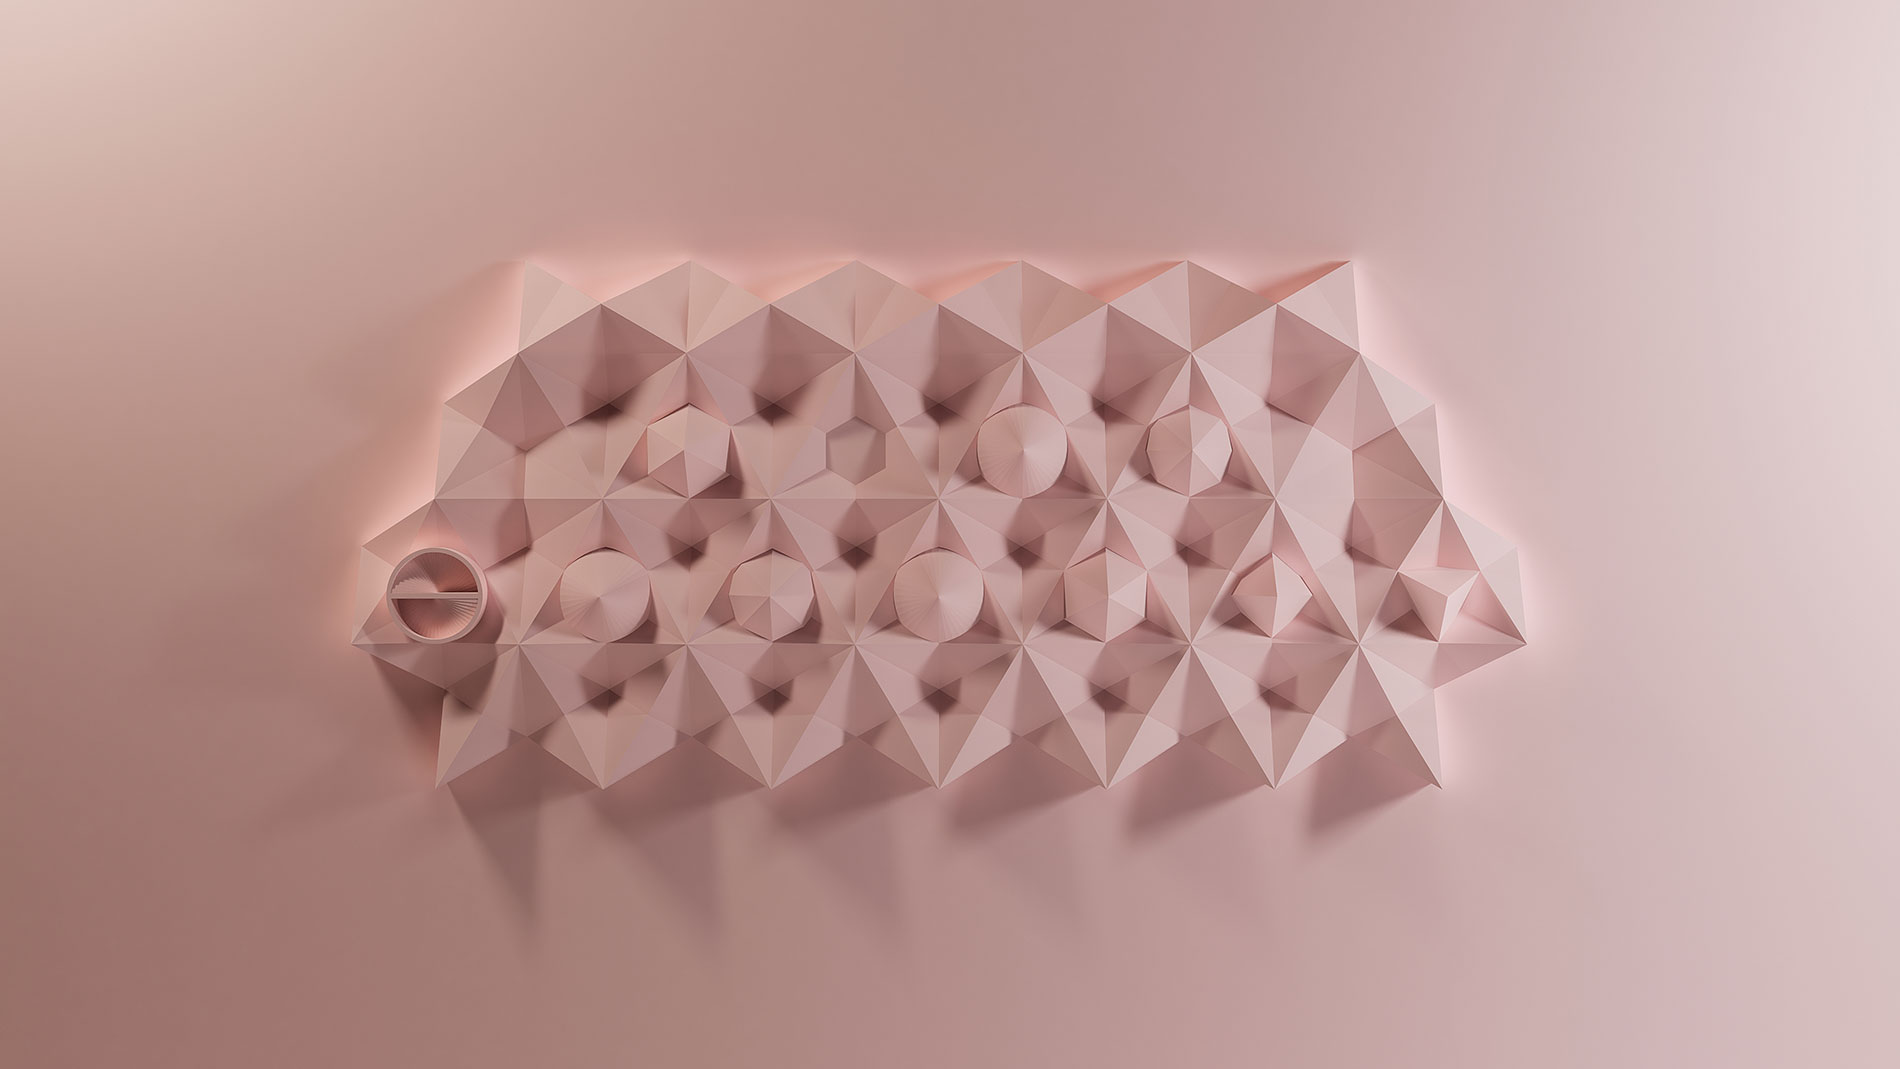 Prisma geometrical forms in pink